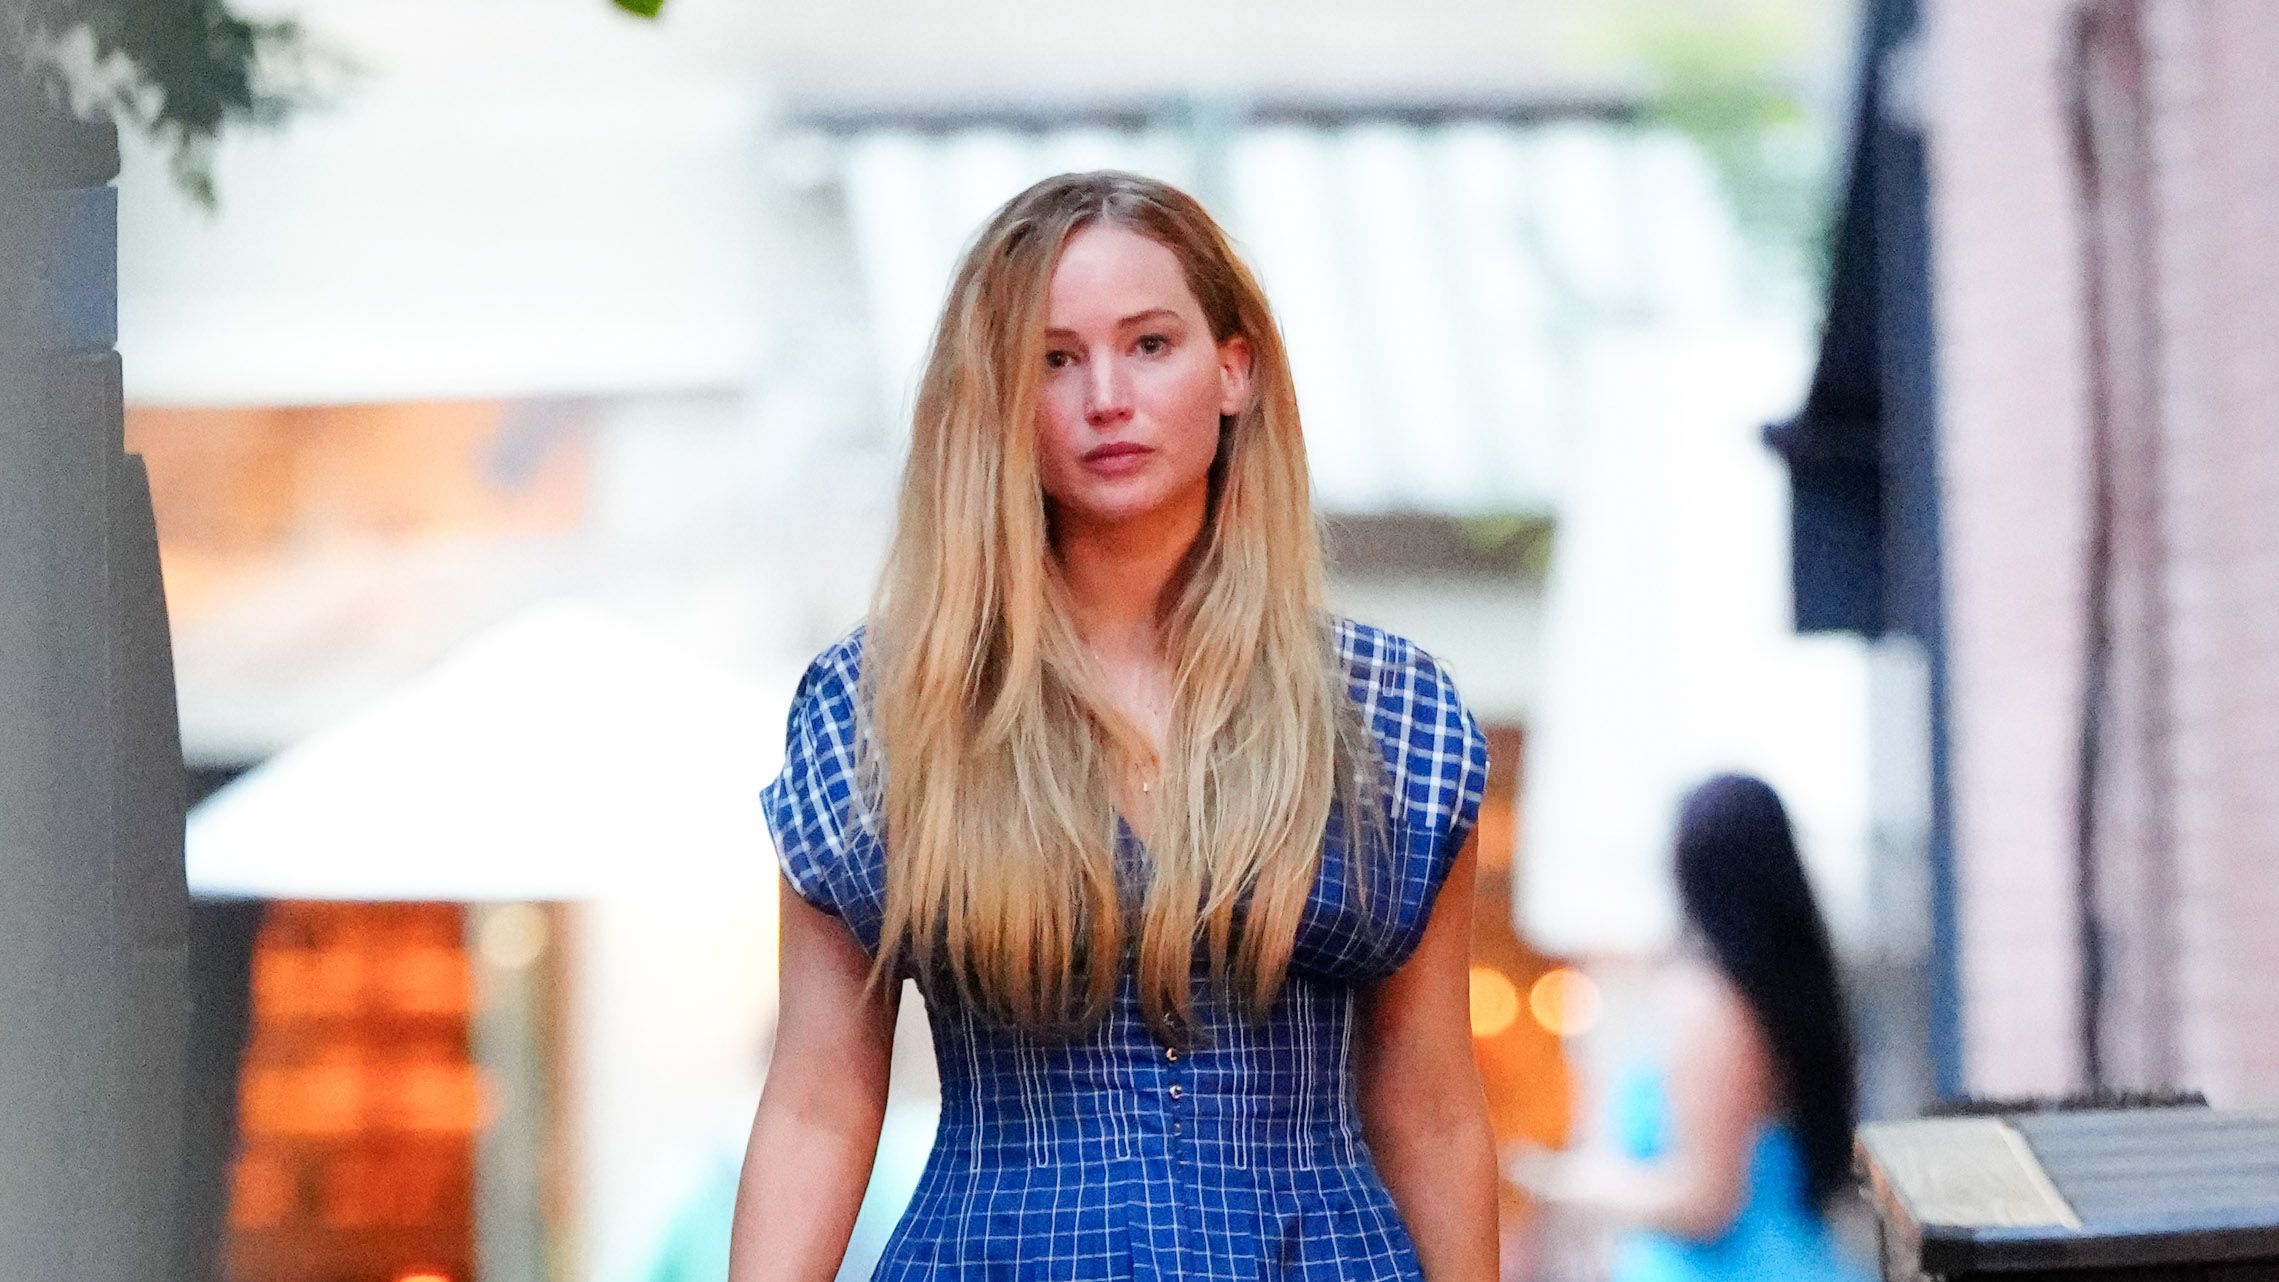 Jennifer Lawrence's Summer-in-the-City Style Is All About the Accessories